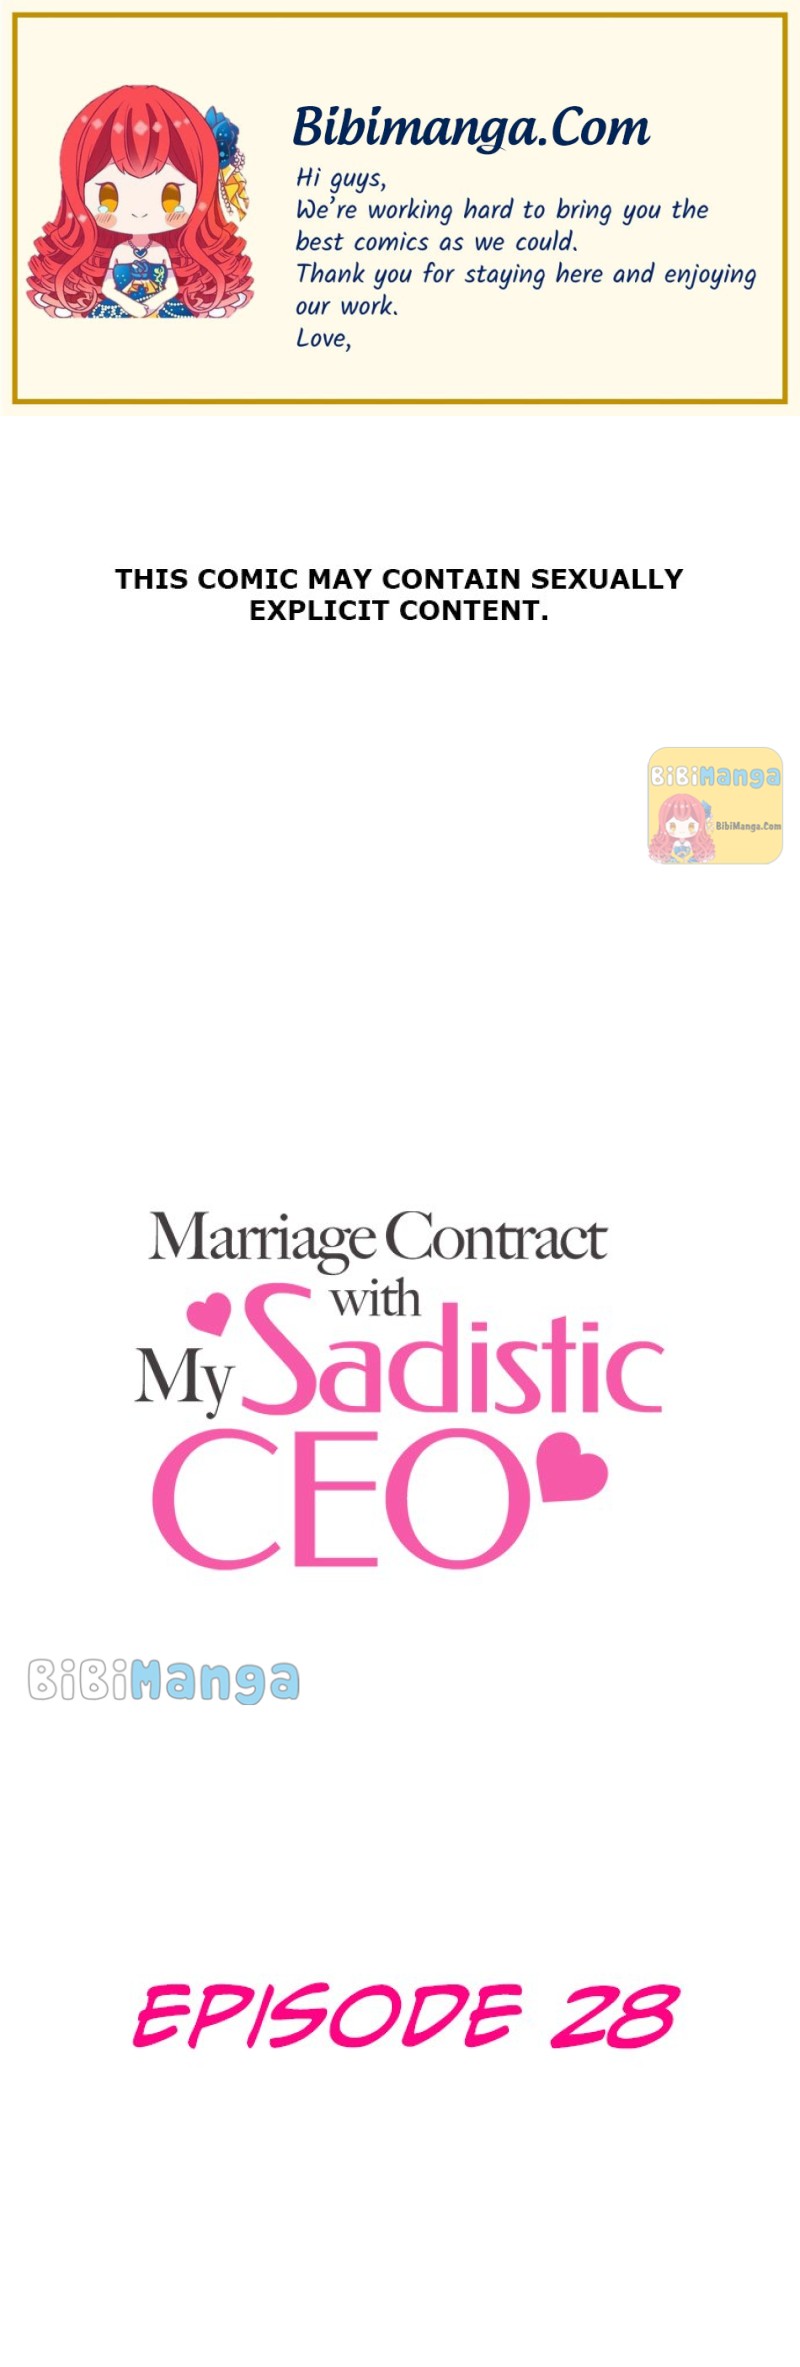 Marriage Contract With My Sadistic Ceo - Page 1